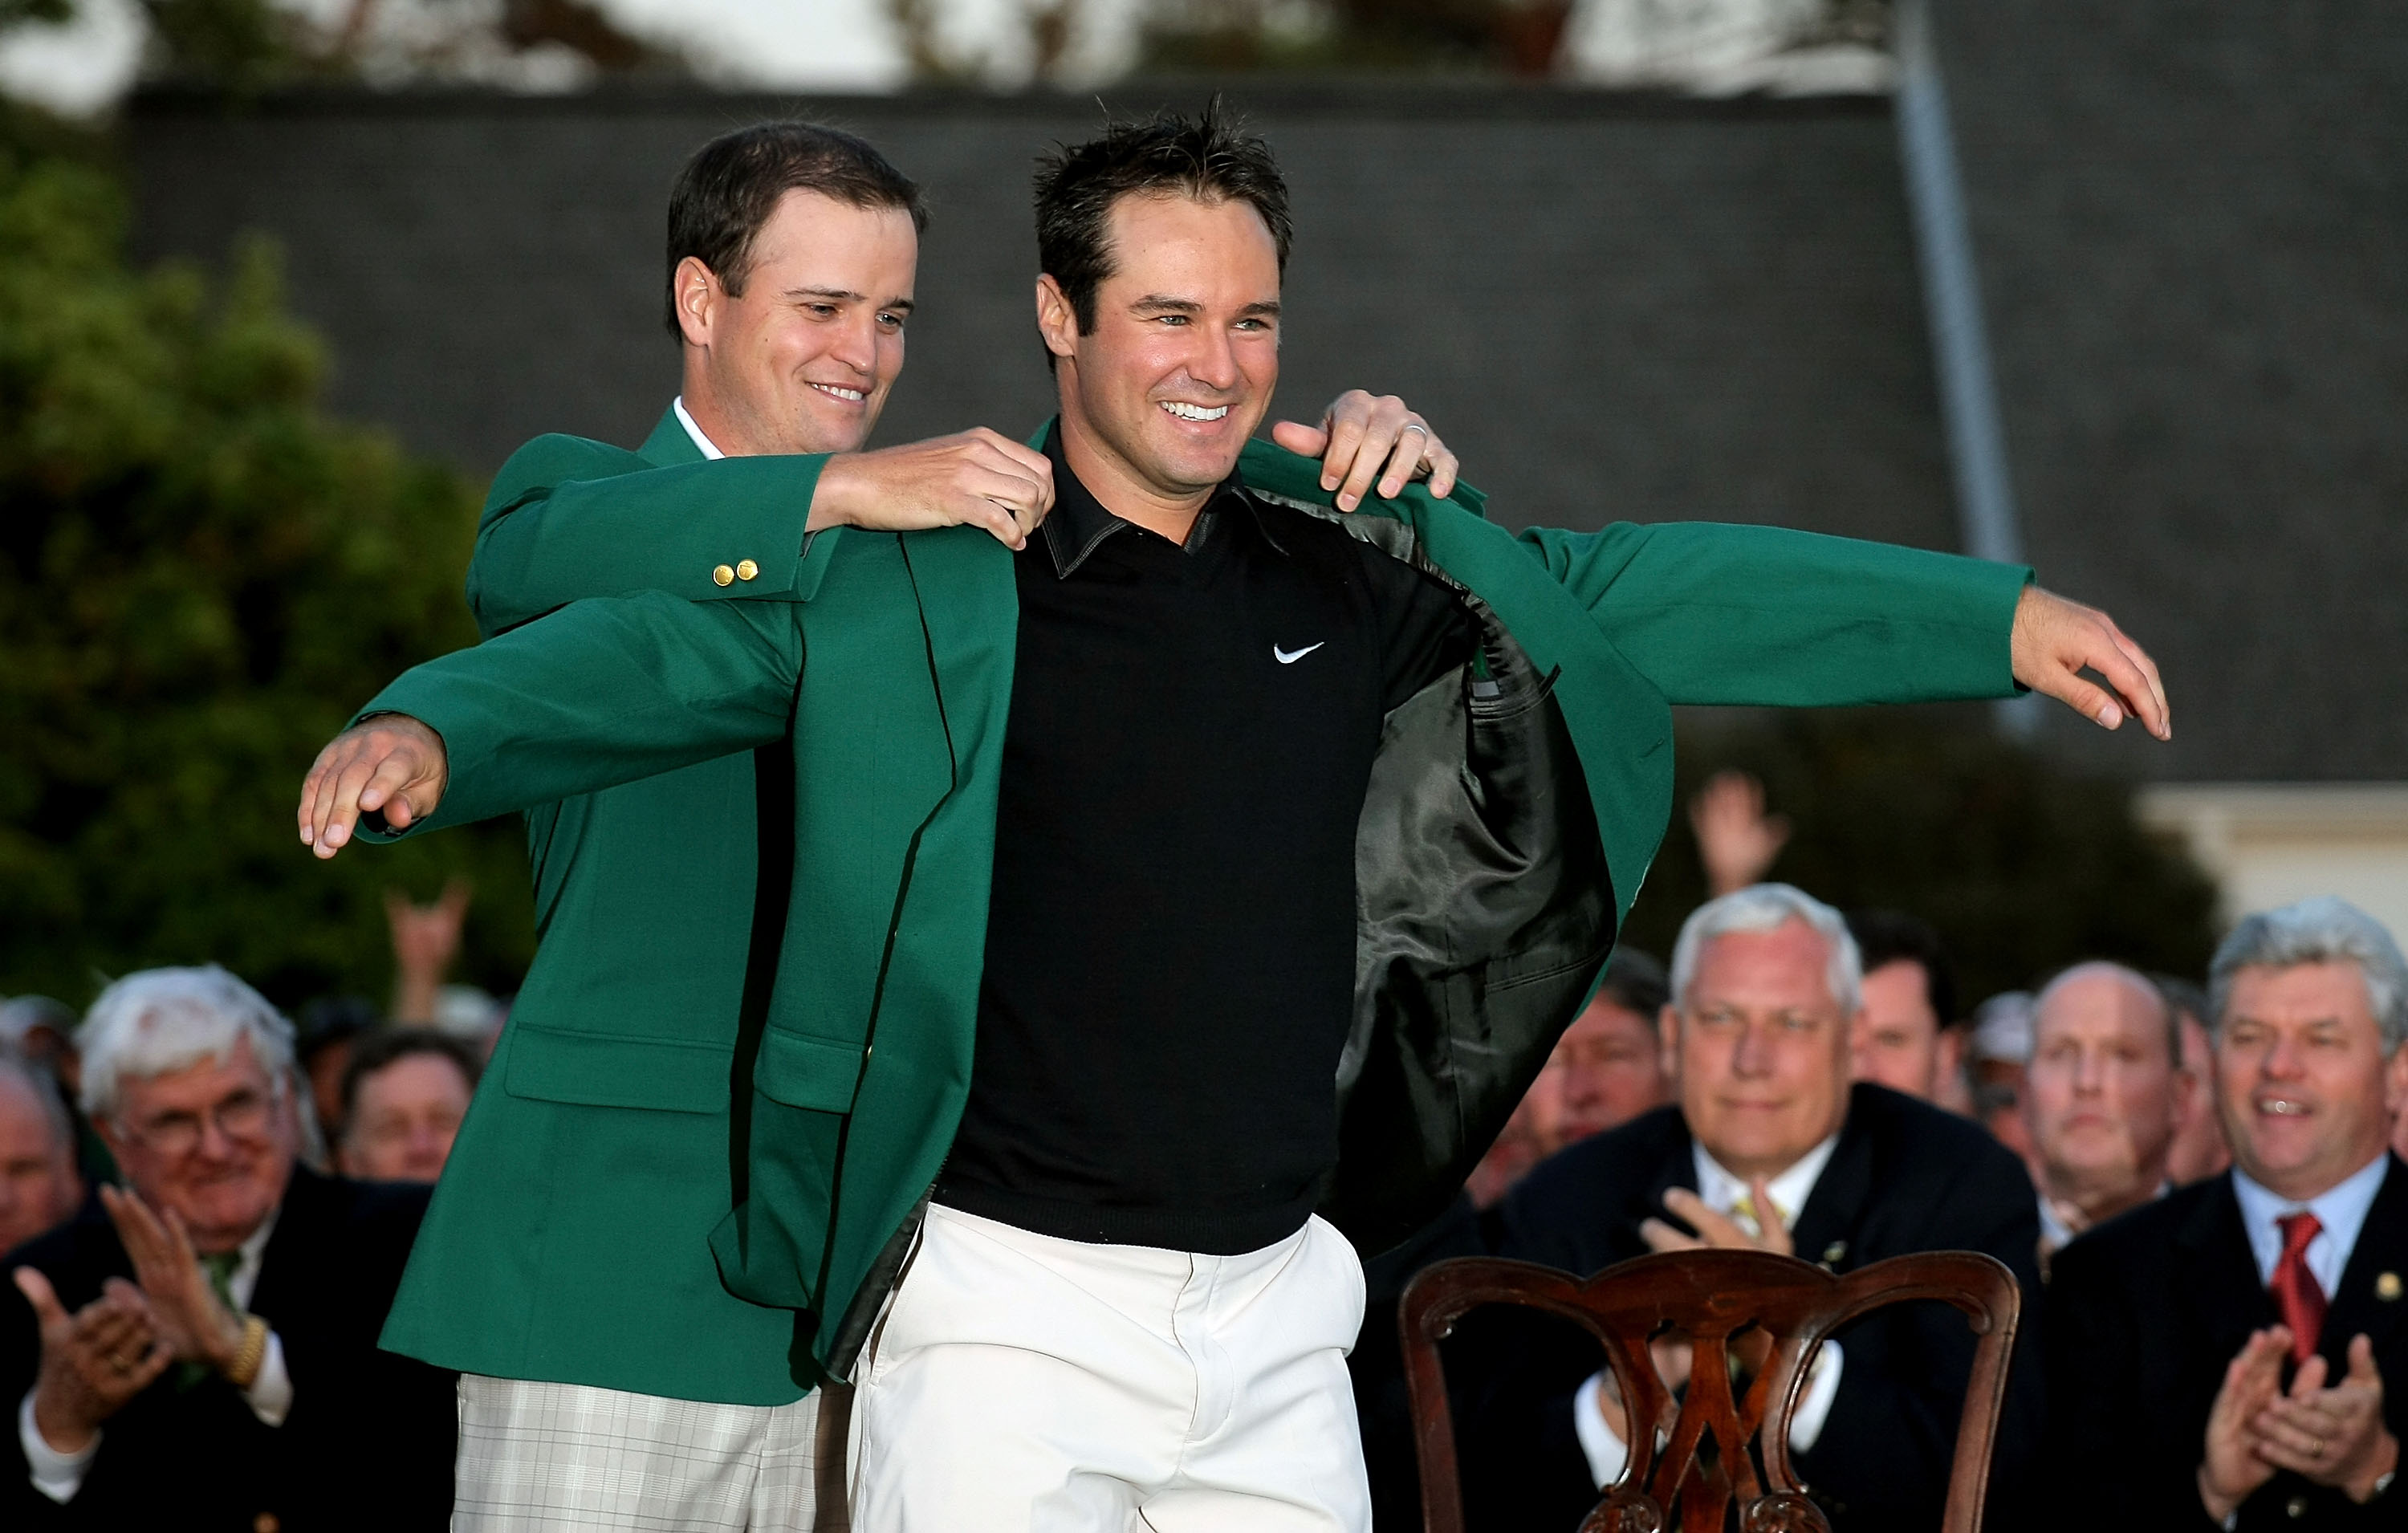 Revisiting three of the greatest upsets in golf history